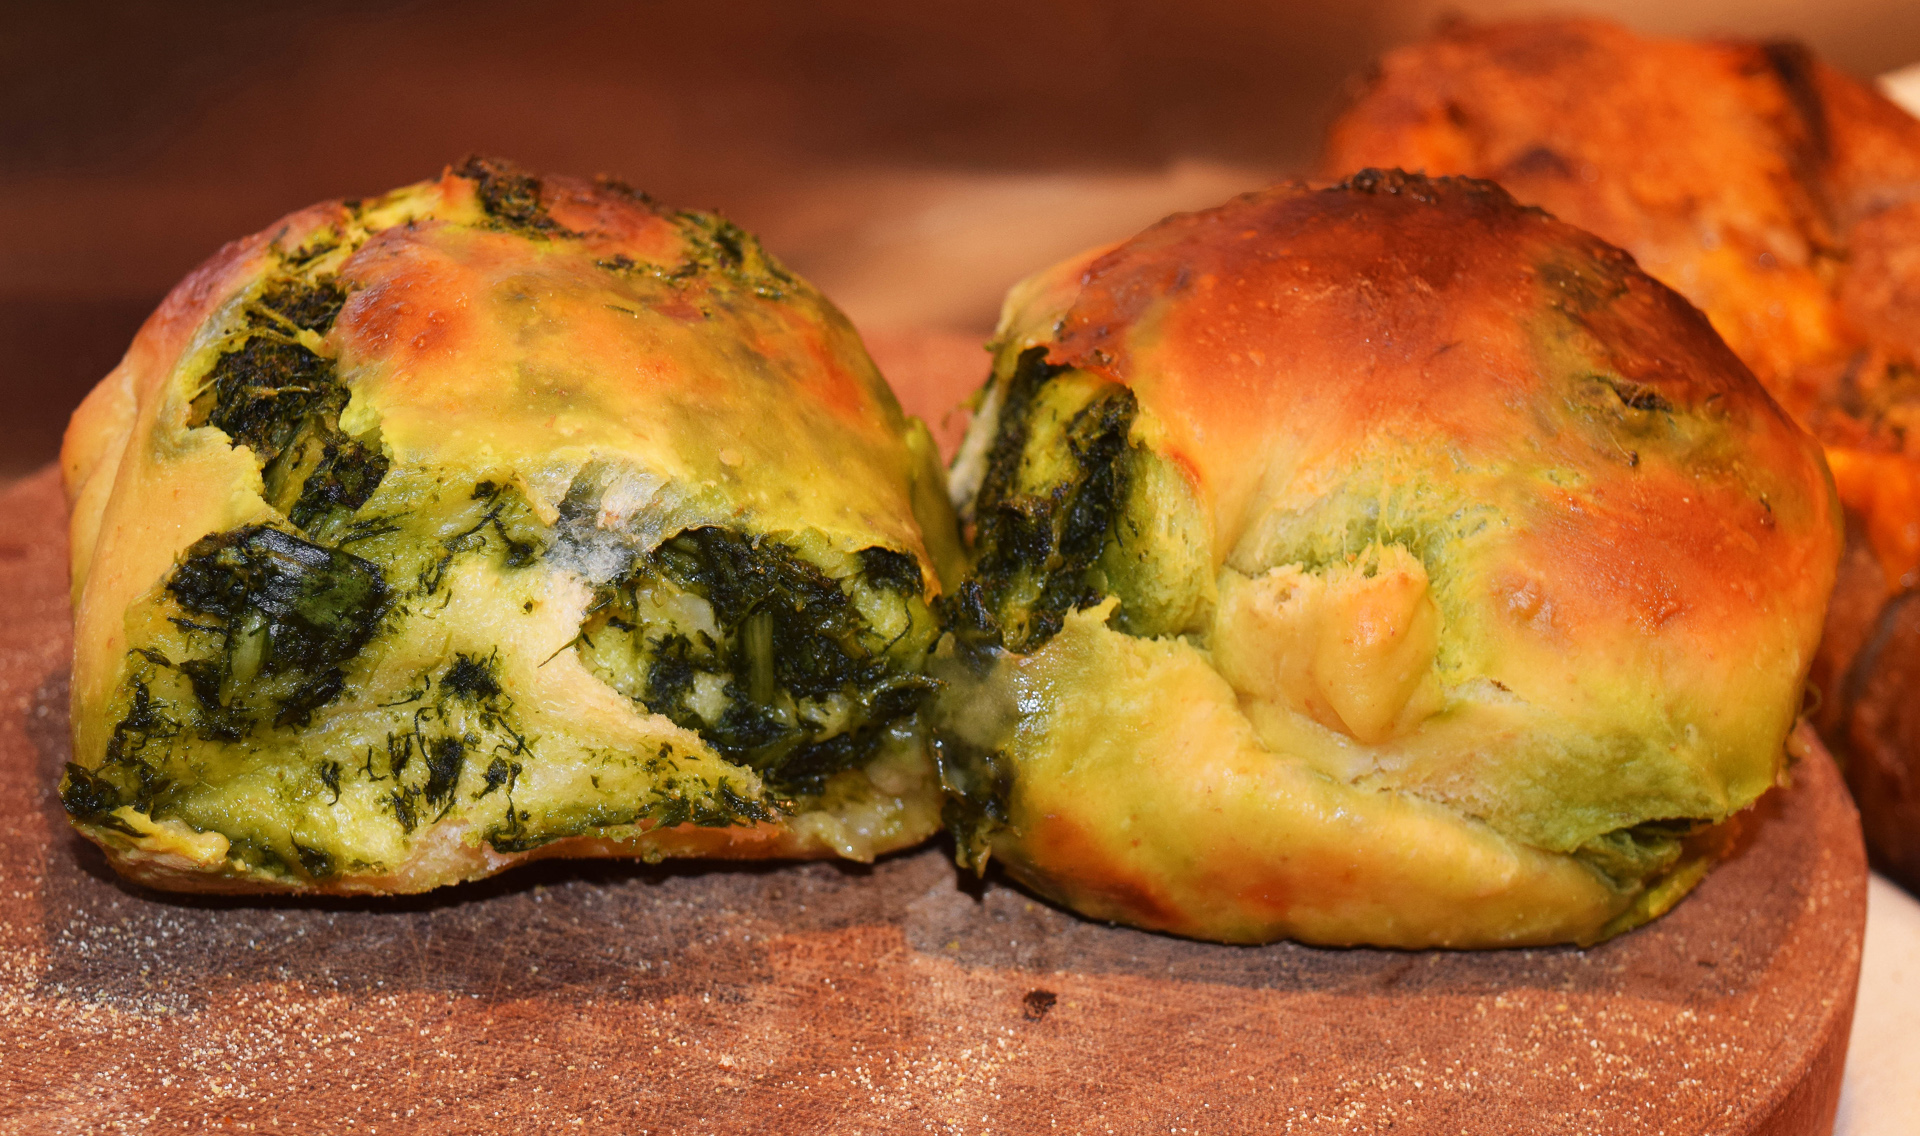 Mayimin likes the flavor of dandelion so she pairs it with fresh dill and swirls it though her rich challah dough.